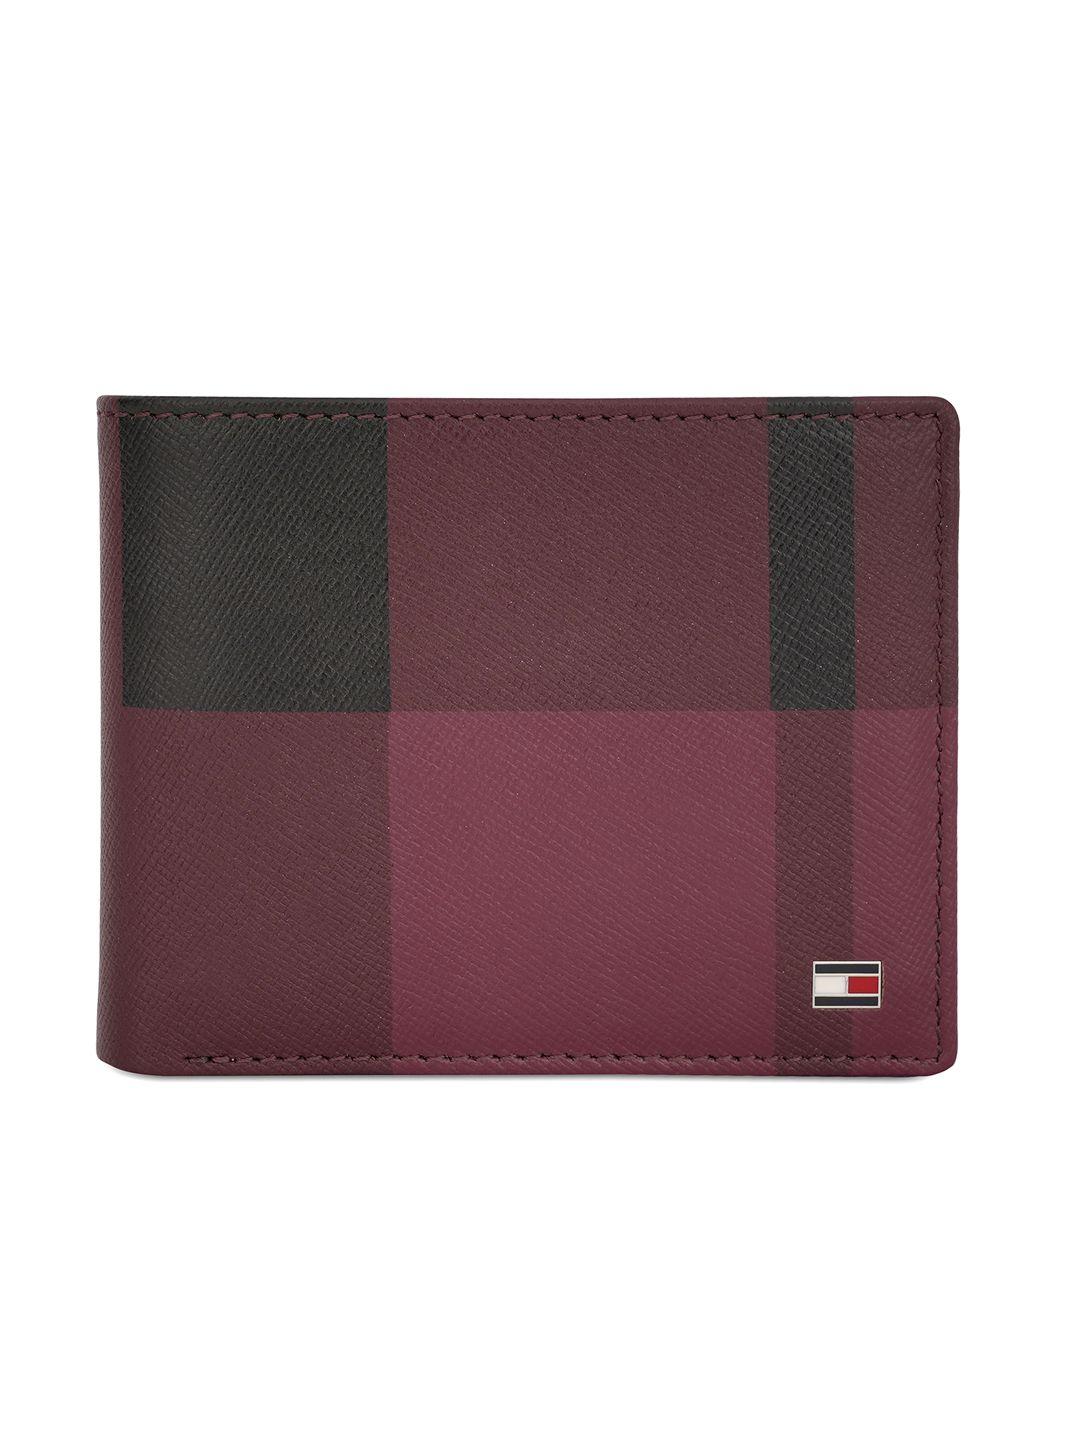 tommy hilfiger checked leather two fold wallet